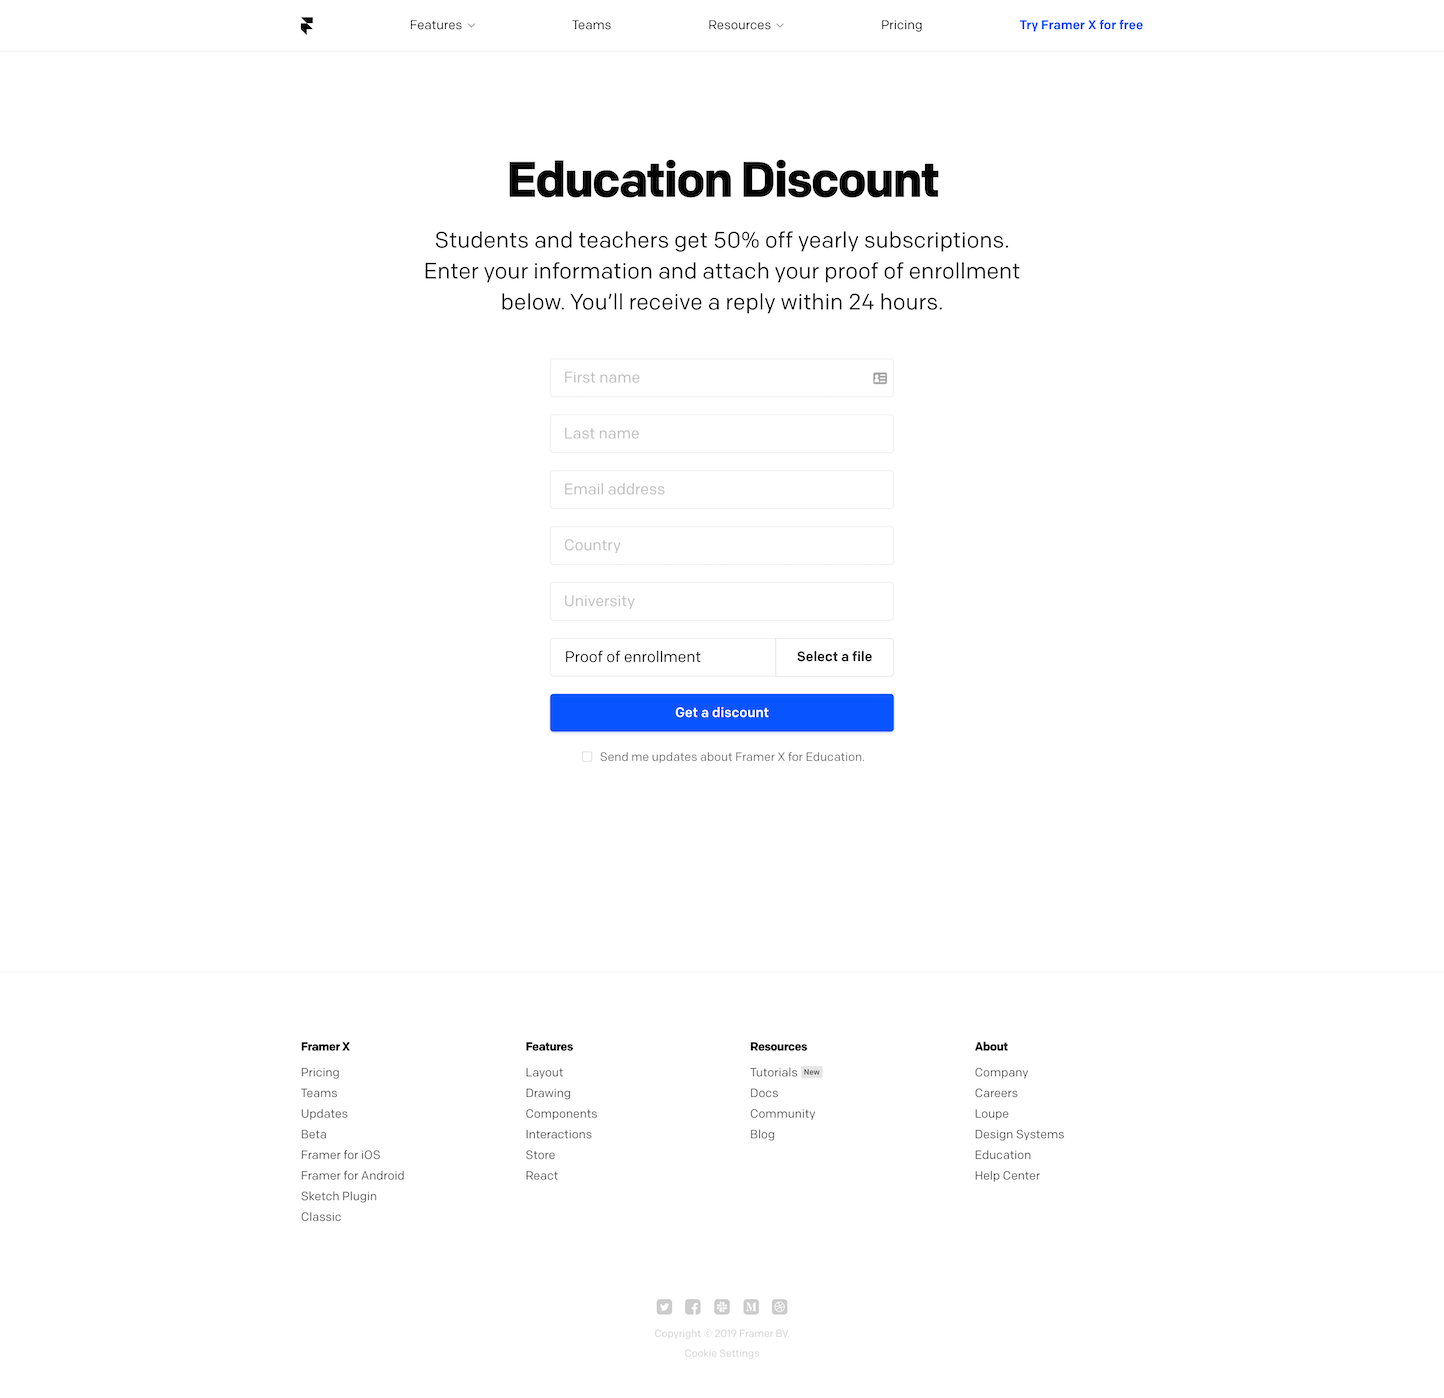 Screenshot of the Educational Discount page from the Framer website.